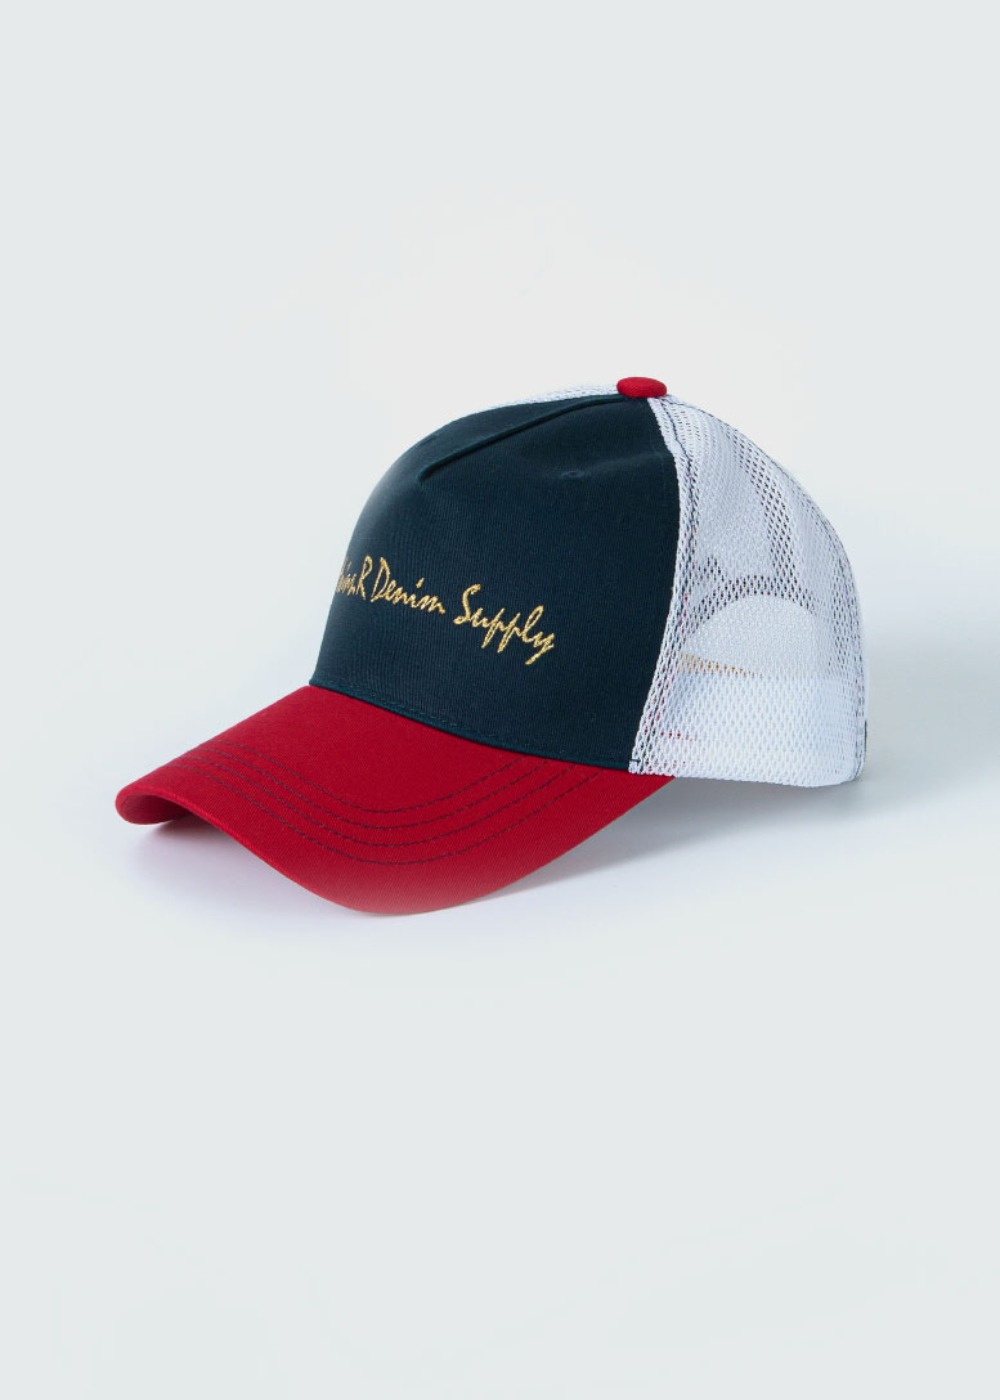 AMICUS TROUBLE MESH CAP NAVY WHITE RED